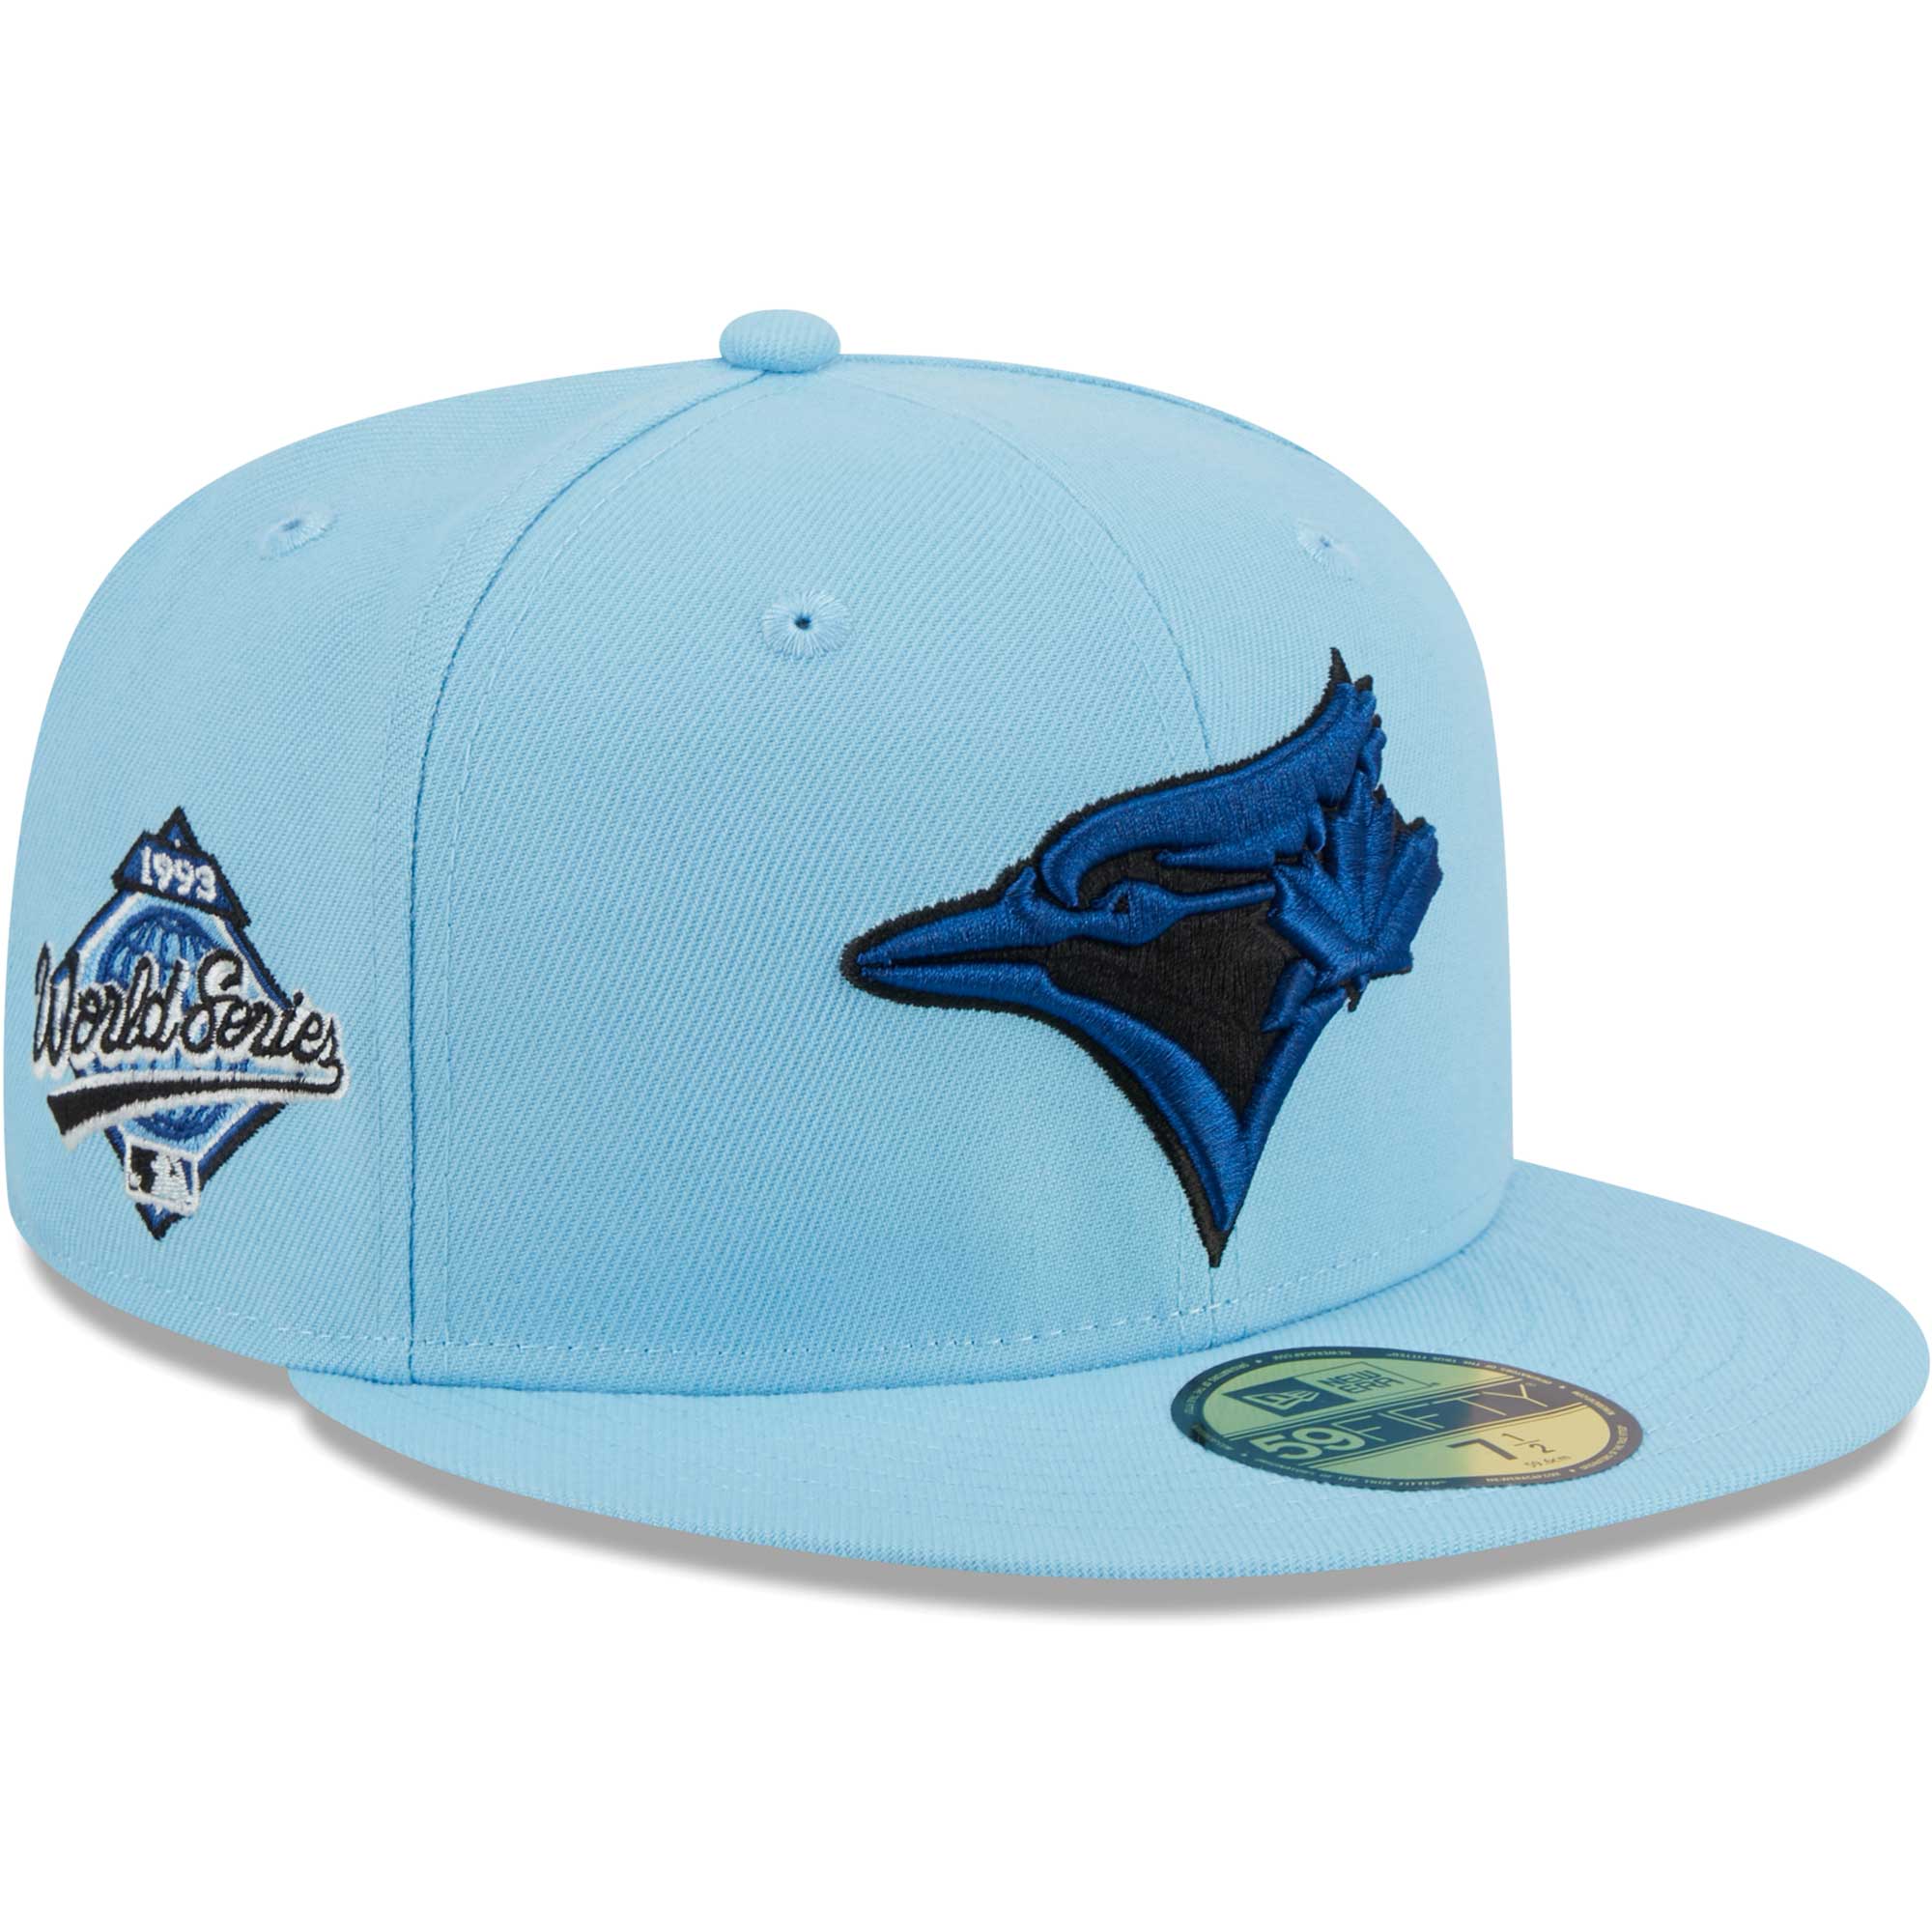 New Era 59Fifty Division Champs Toronto Blue Jays Fitted Cap